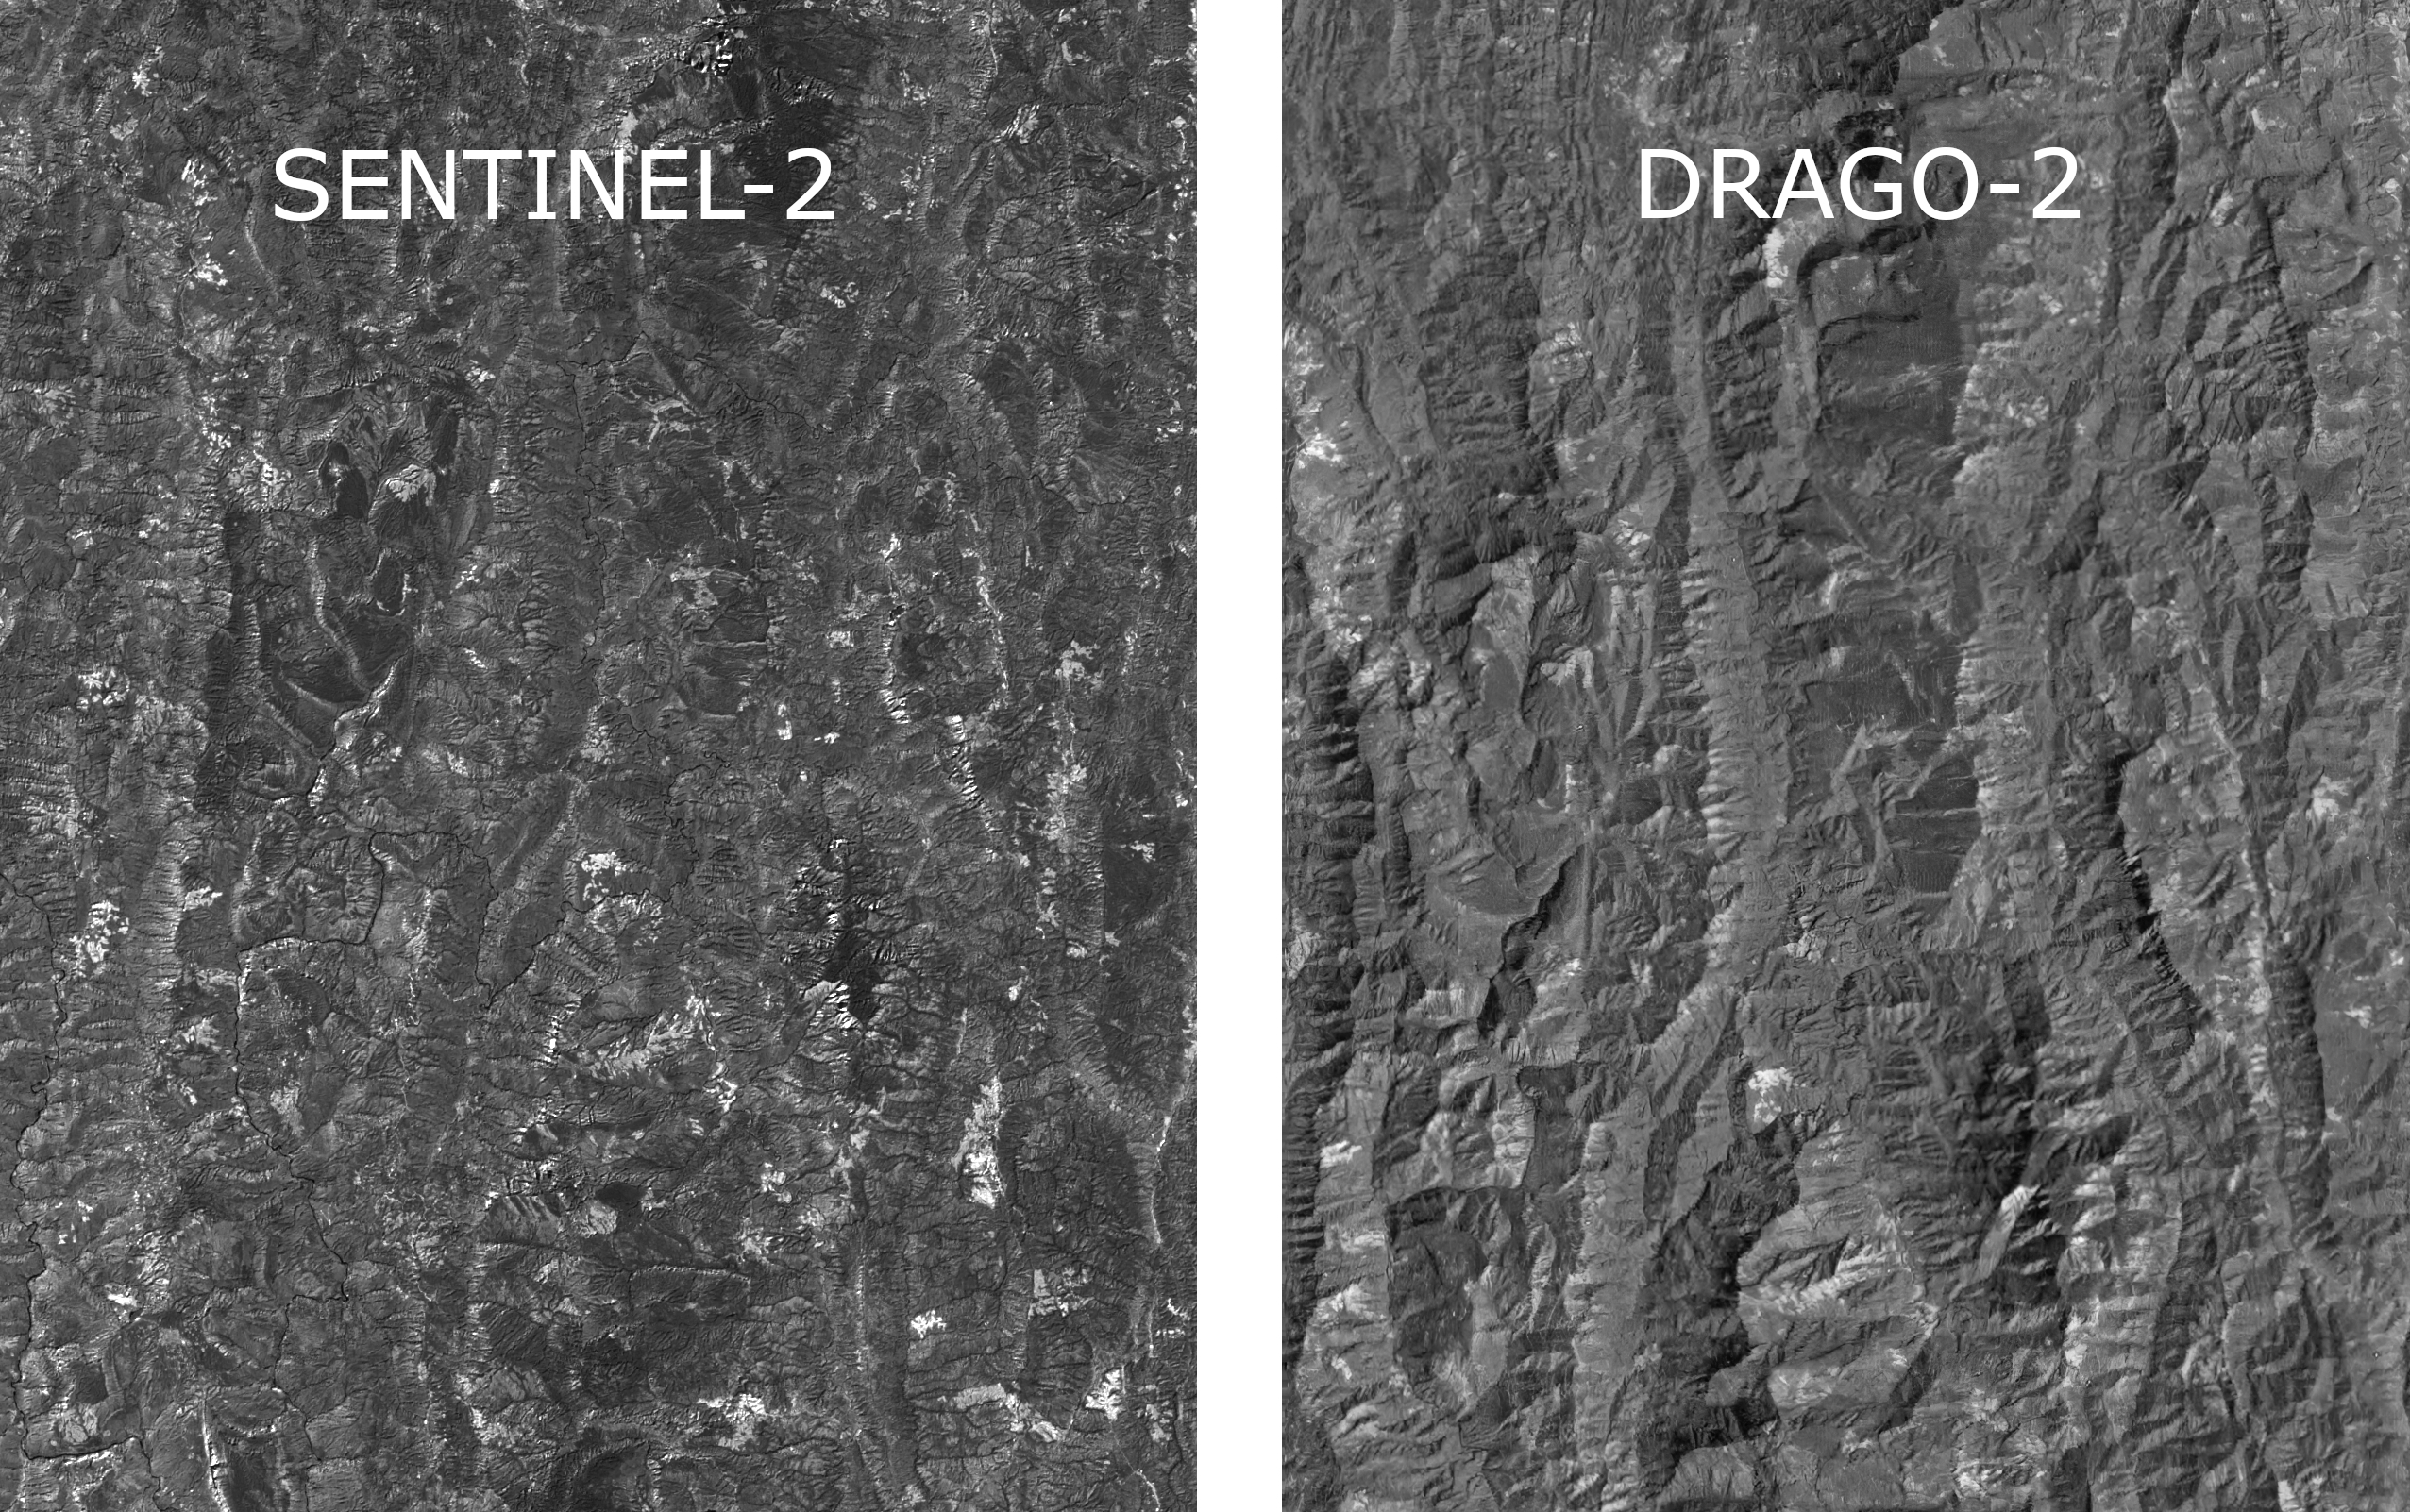 Comparison between the images from Sentinel-2 and DRAGO-2 of the State of Mizoran, India. Credit: IACTEC